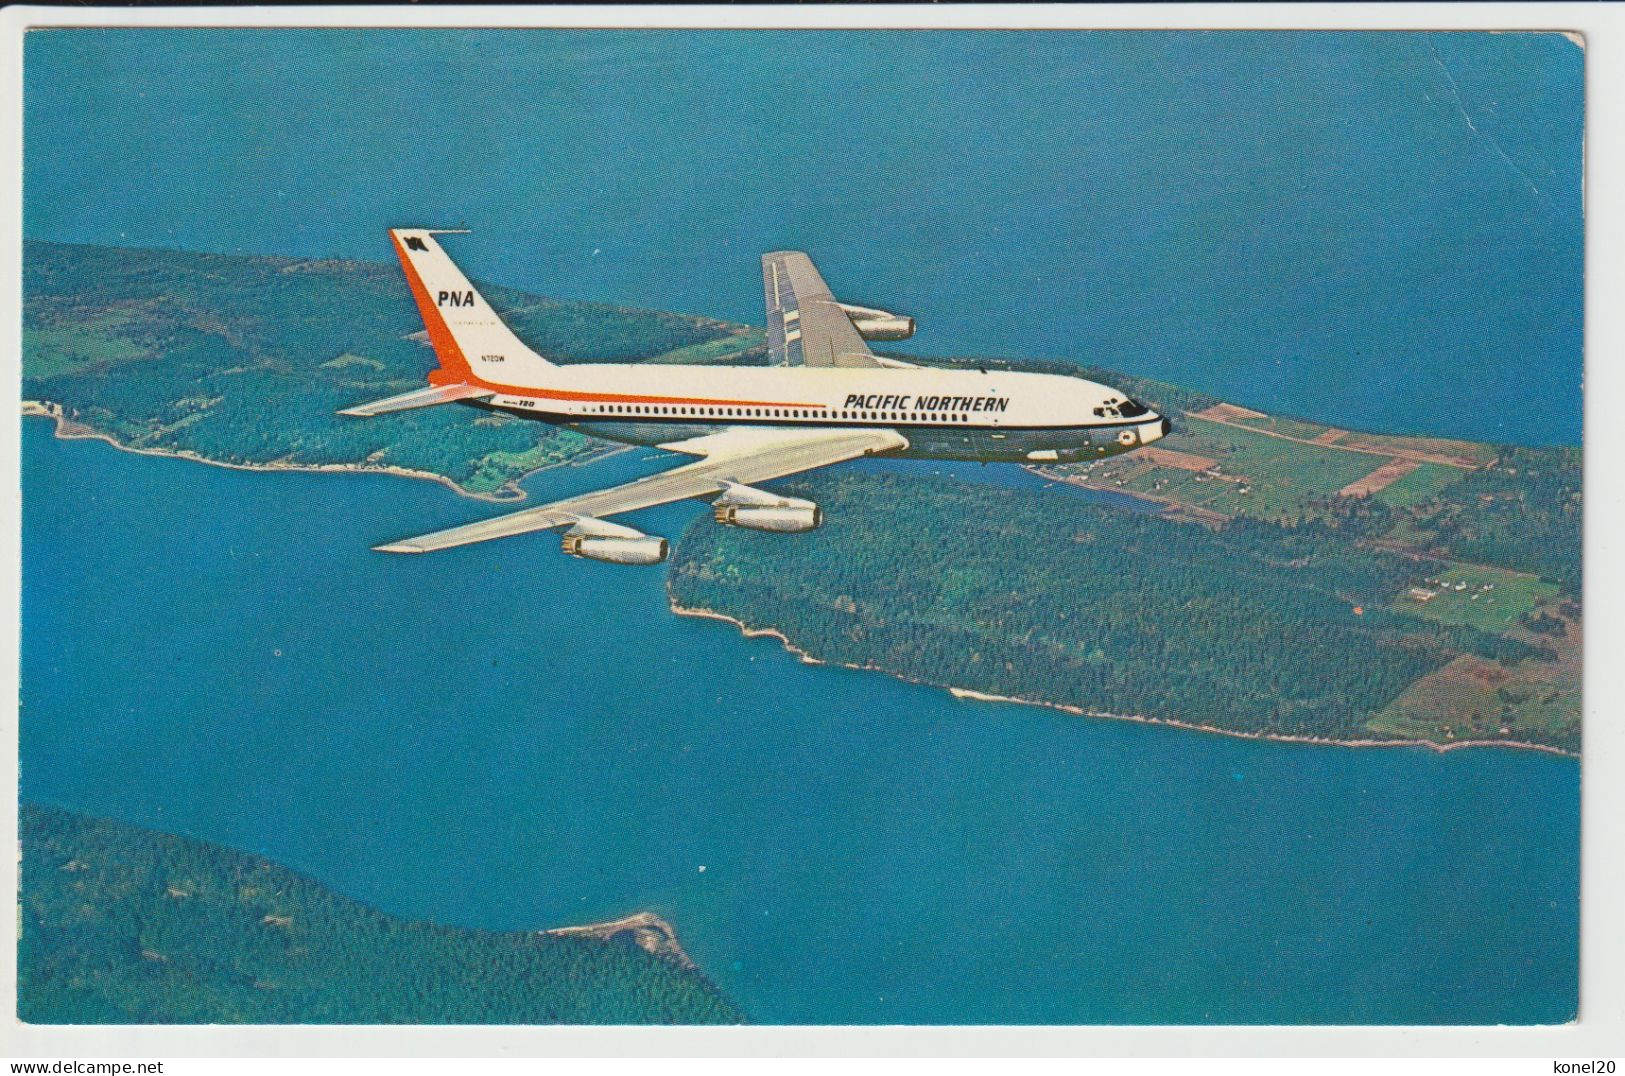 Vintage Pc PNA Pacific Northern Airlines Boeing 720 Aircraft - 1919-1938: Entre Guerras